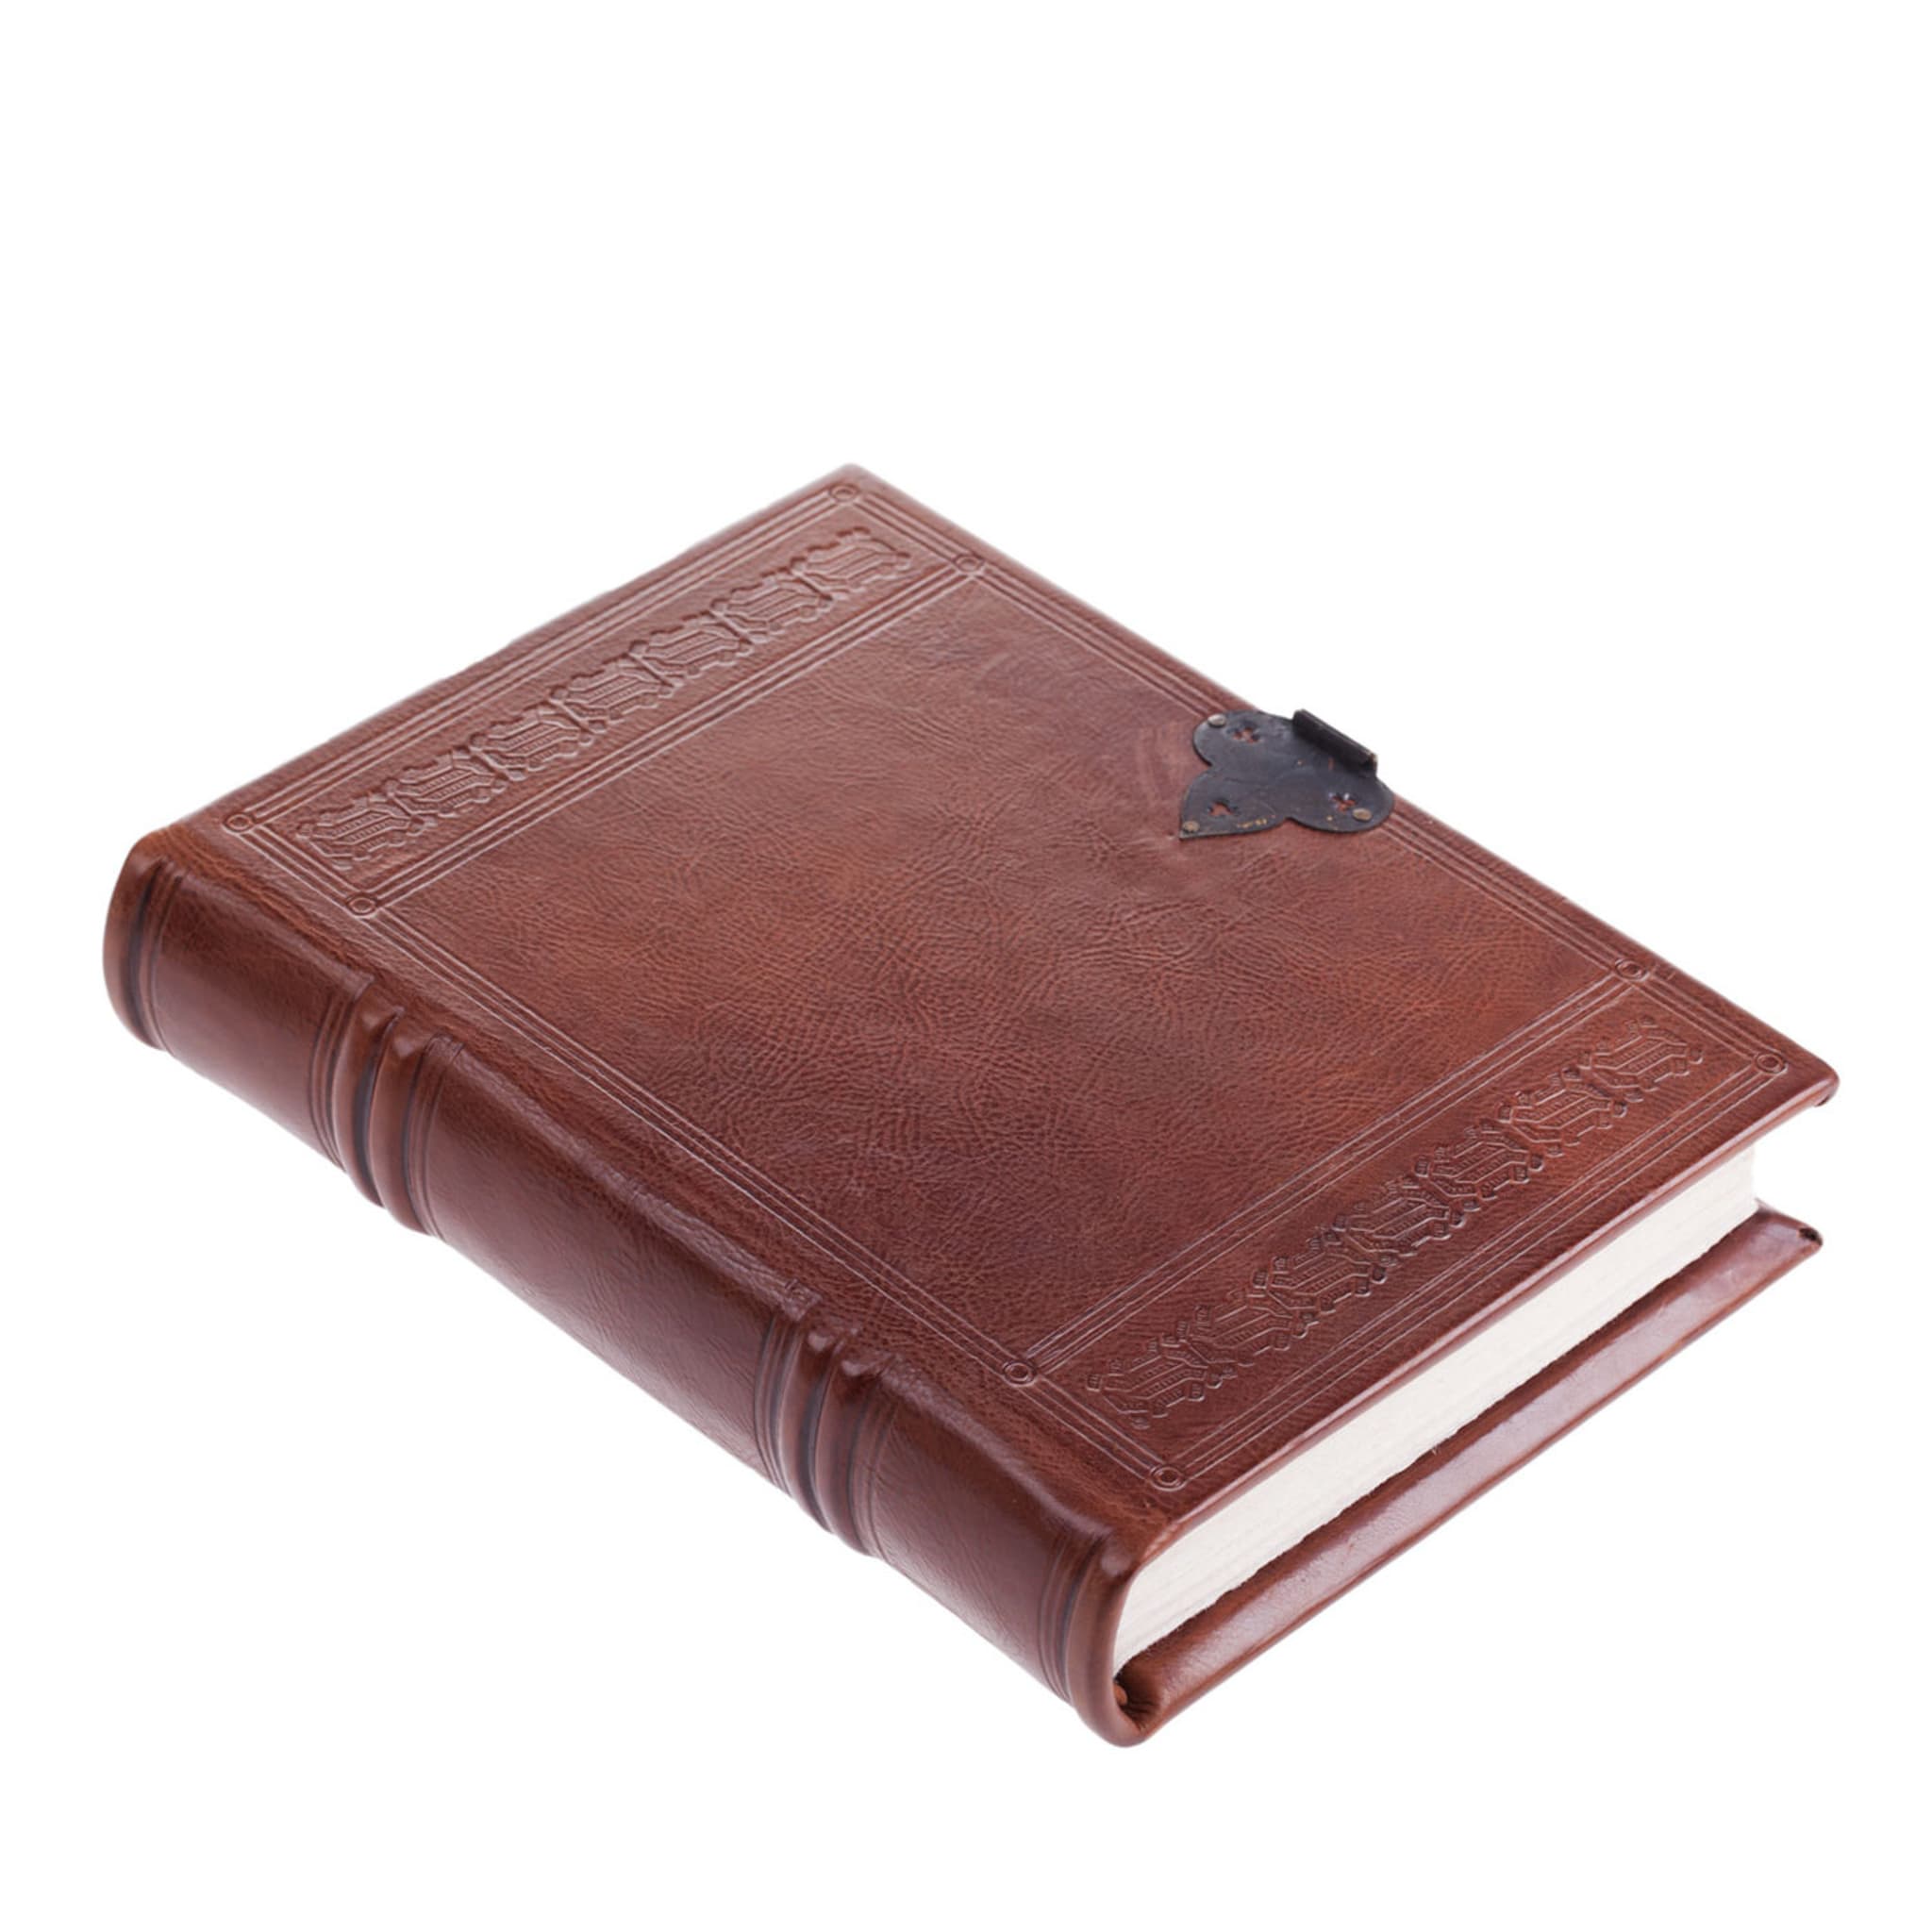 Fermaglio Leather Book - Main view